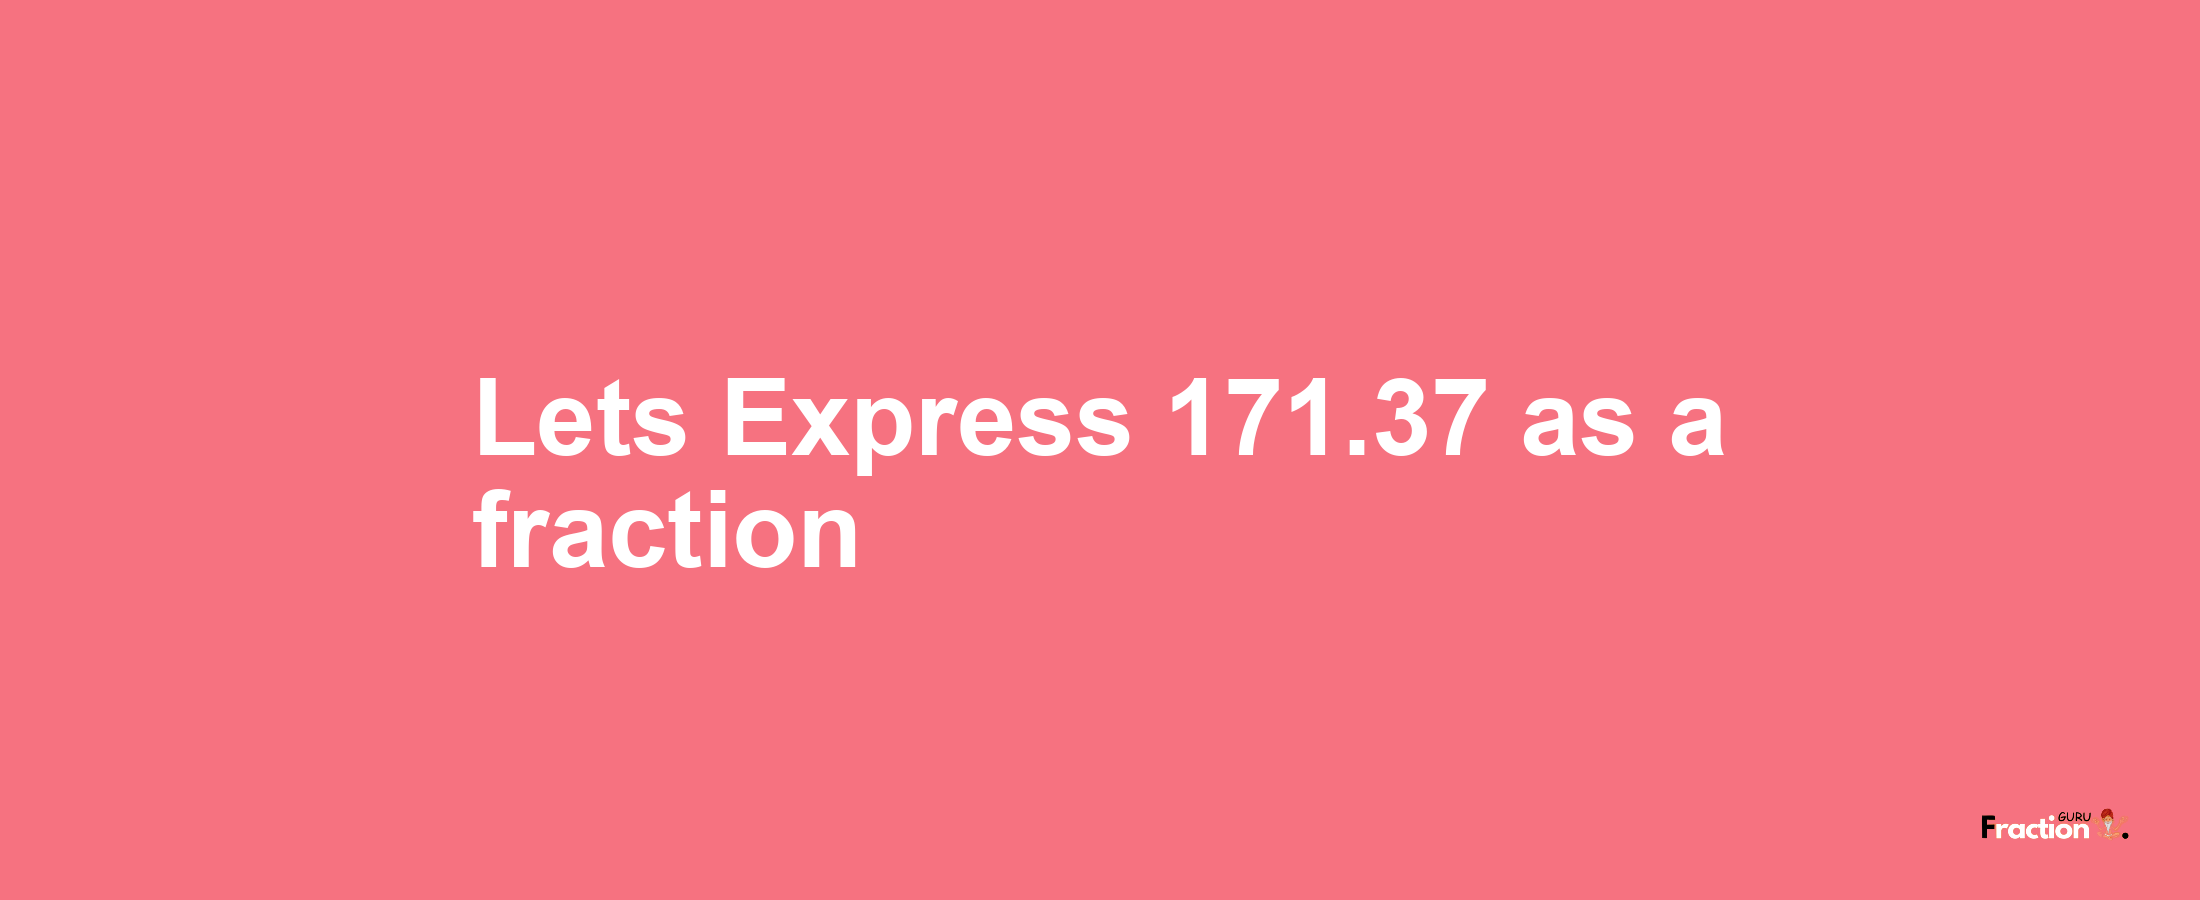 Lets Express 171.37 as afraction